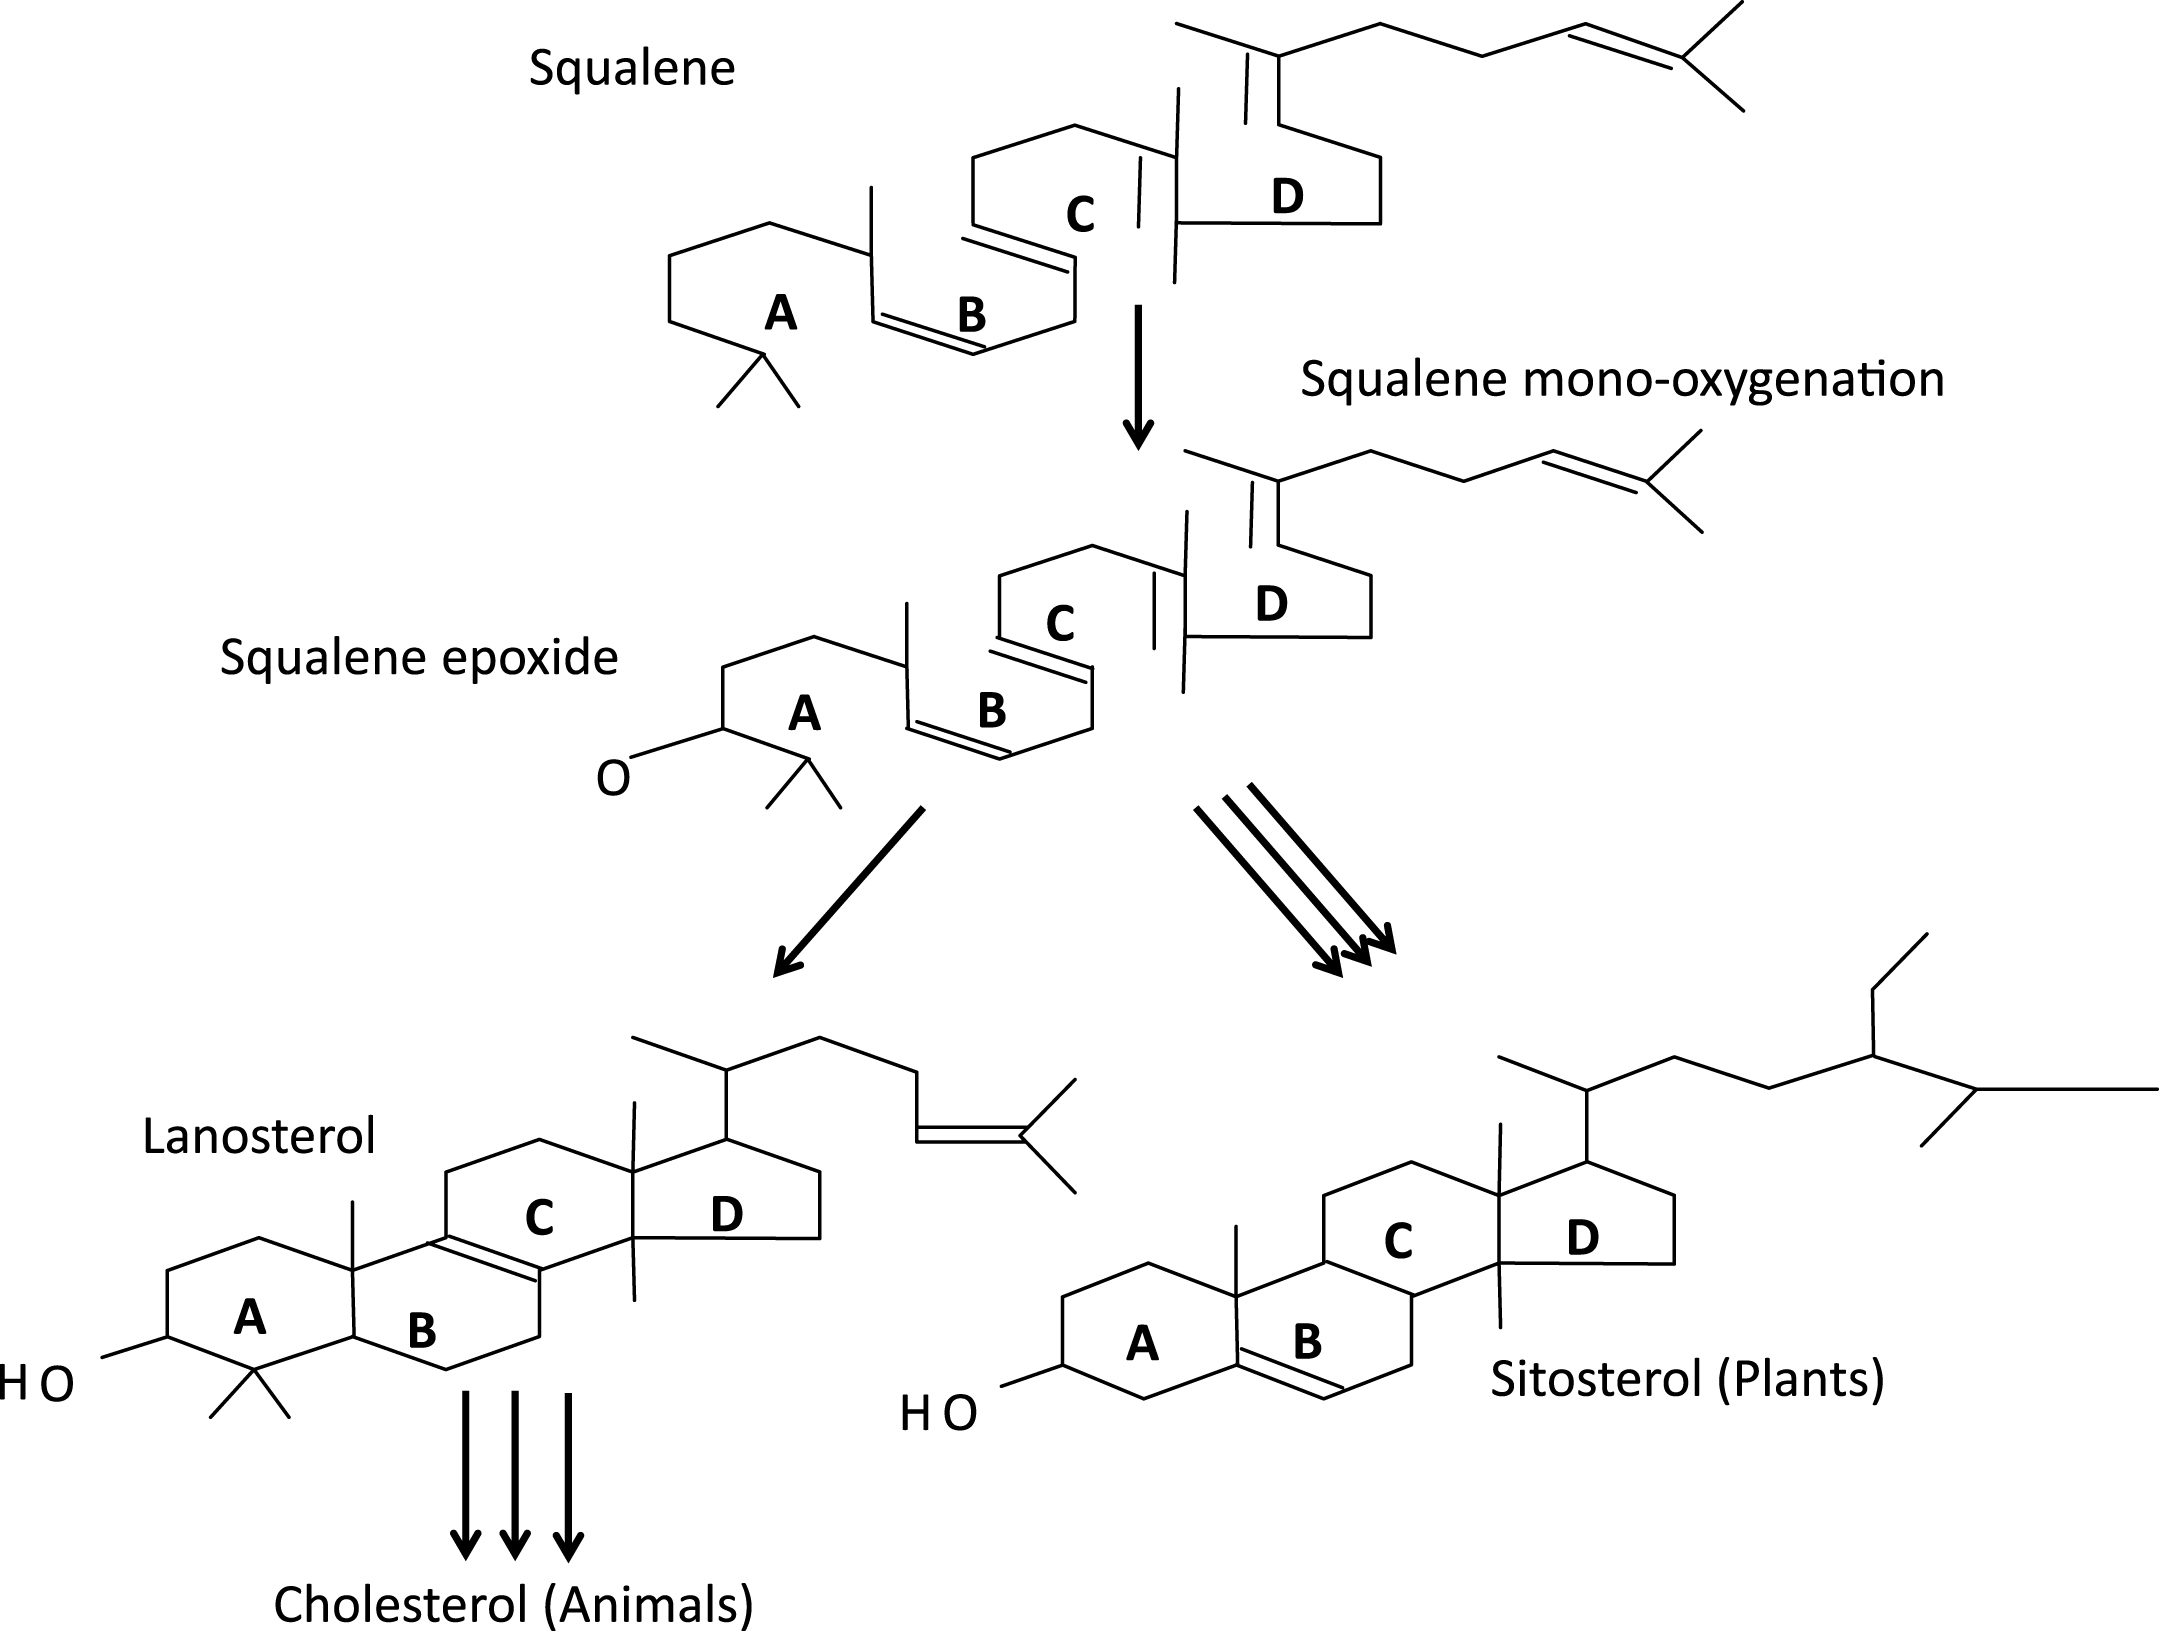 Ultimate synthesis of cholesterol in animals from squalene and of sitosterol in plants from squalene. Greatly modified from Desmond and Gribaldo, 2009.